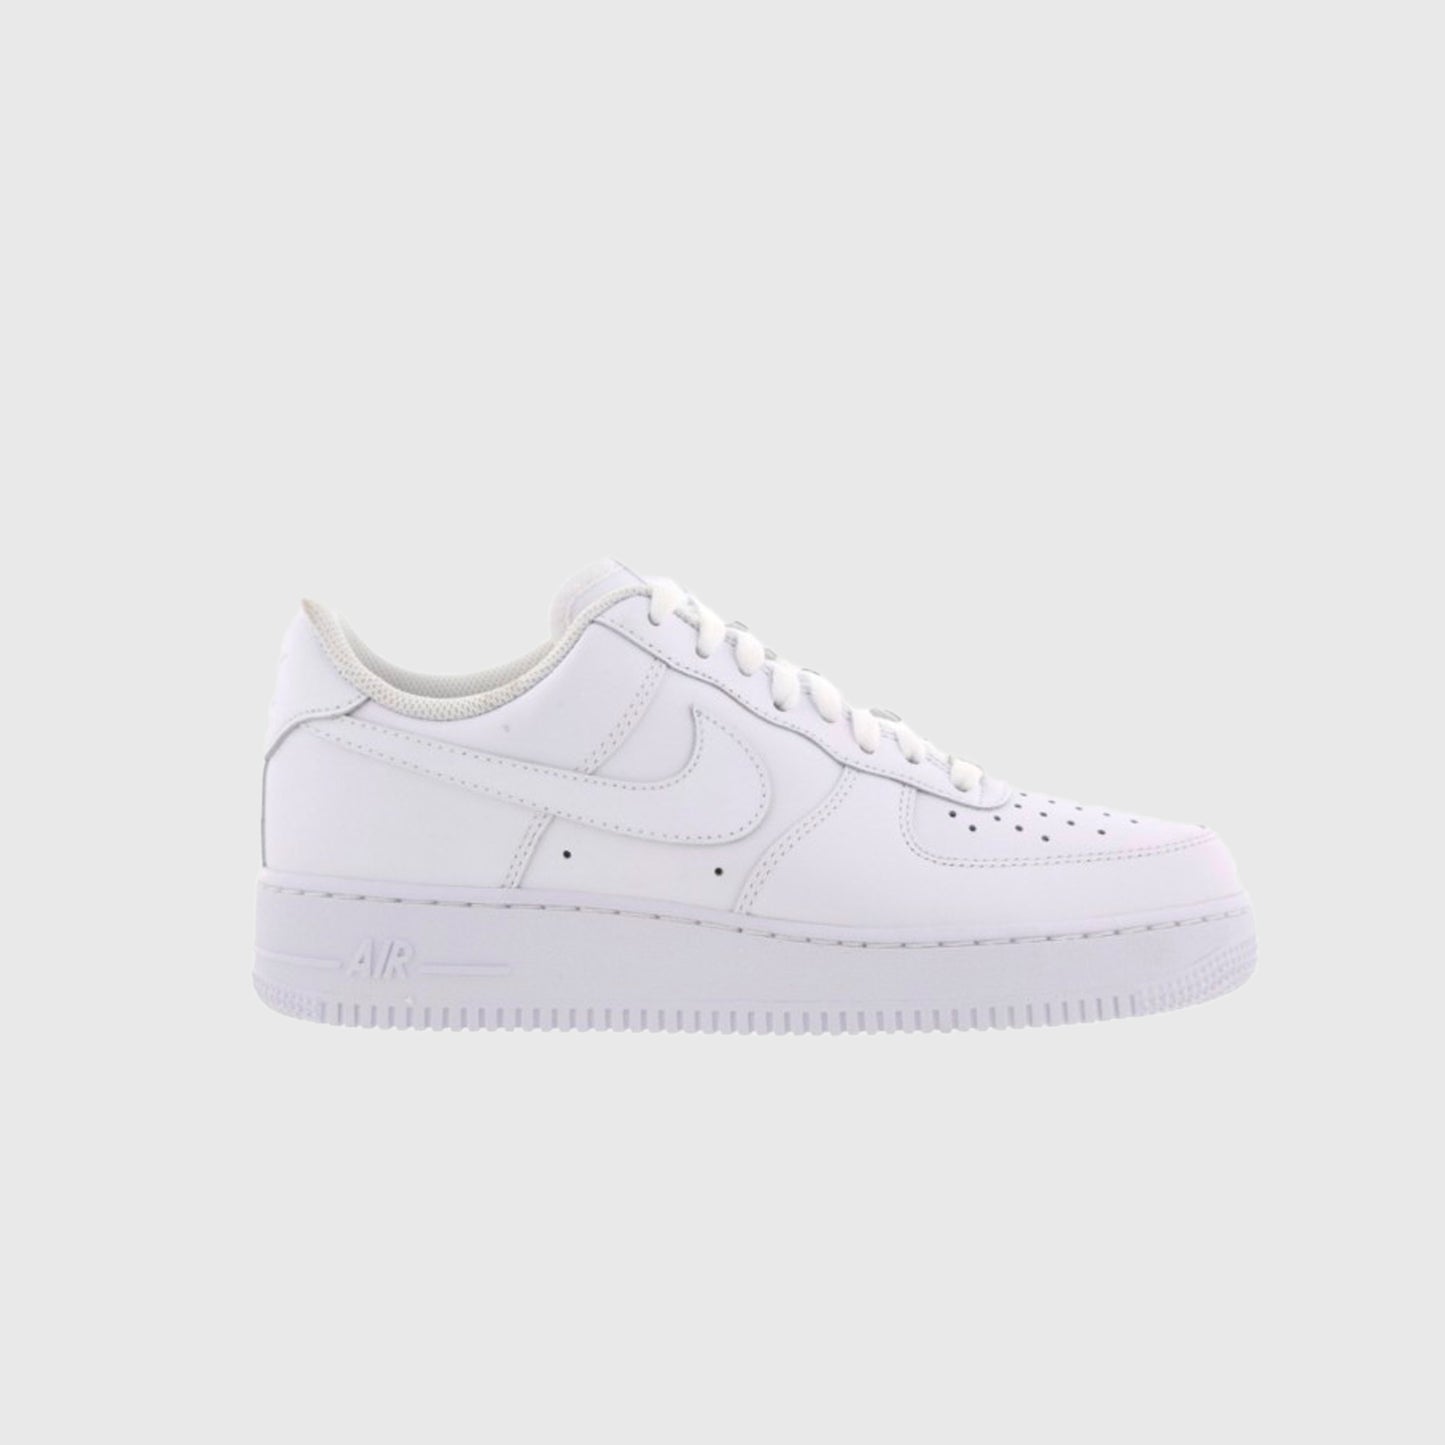 AIR FORCE ONE TOTAL WHITE